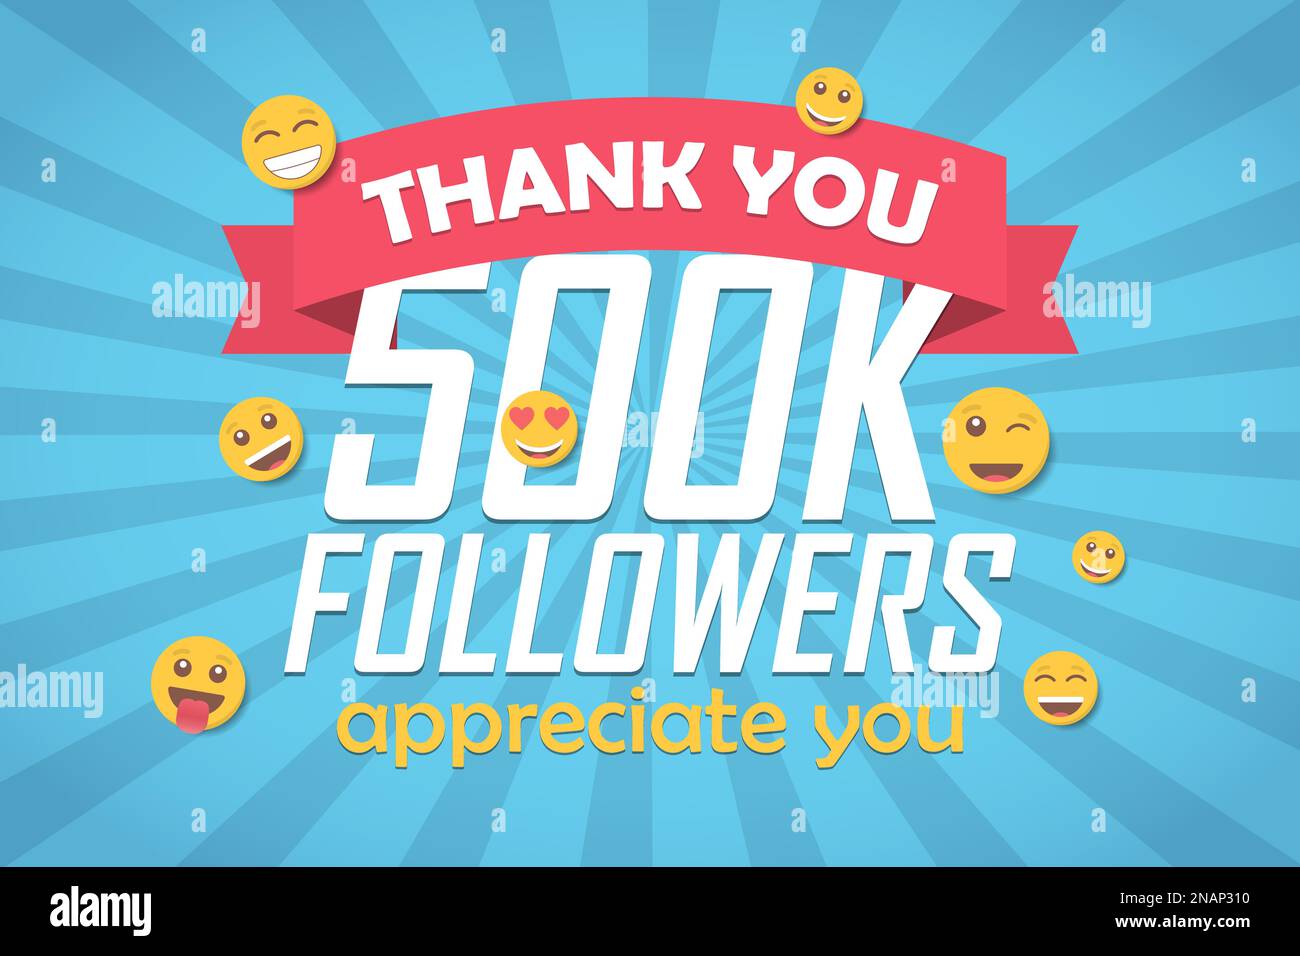 Thank you 500k followers congratulation background with emoticon. Vector illustration Stock Vector